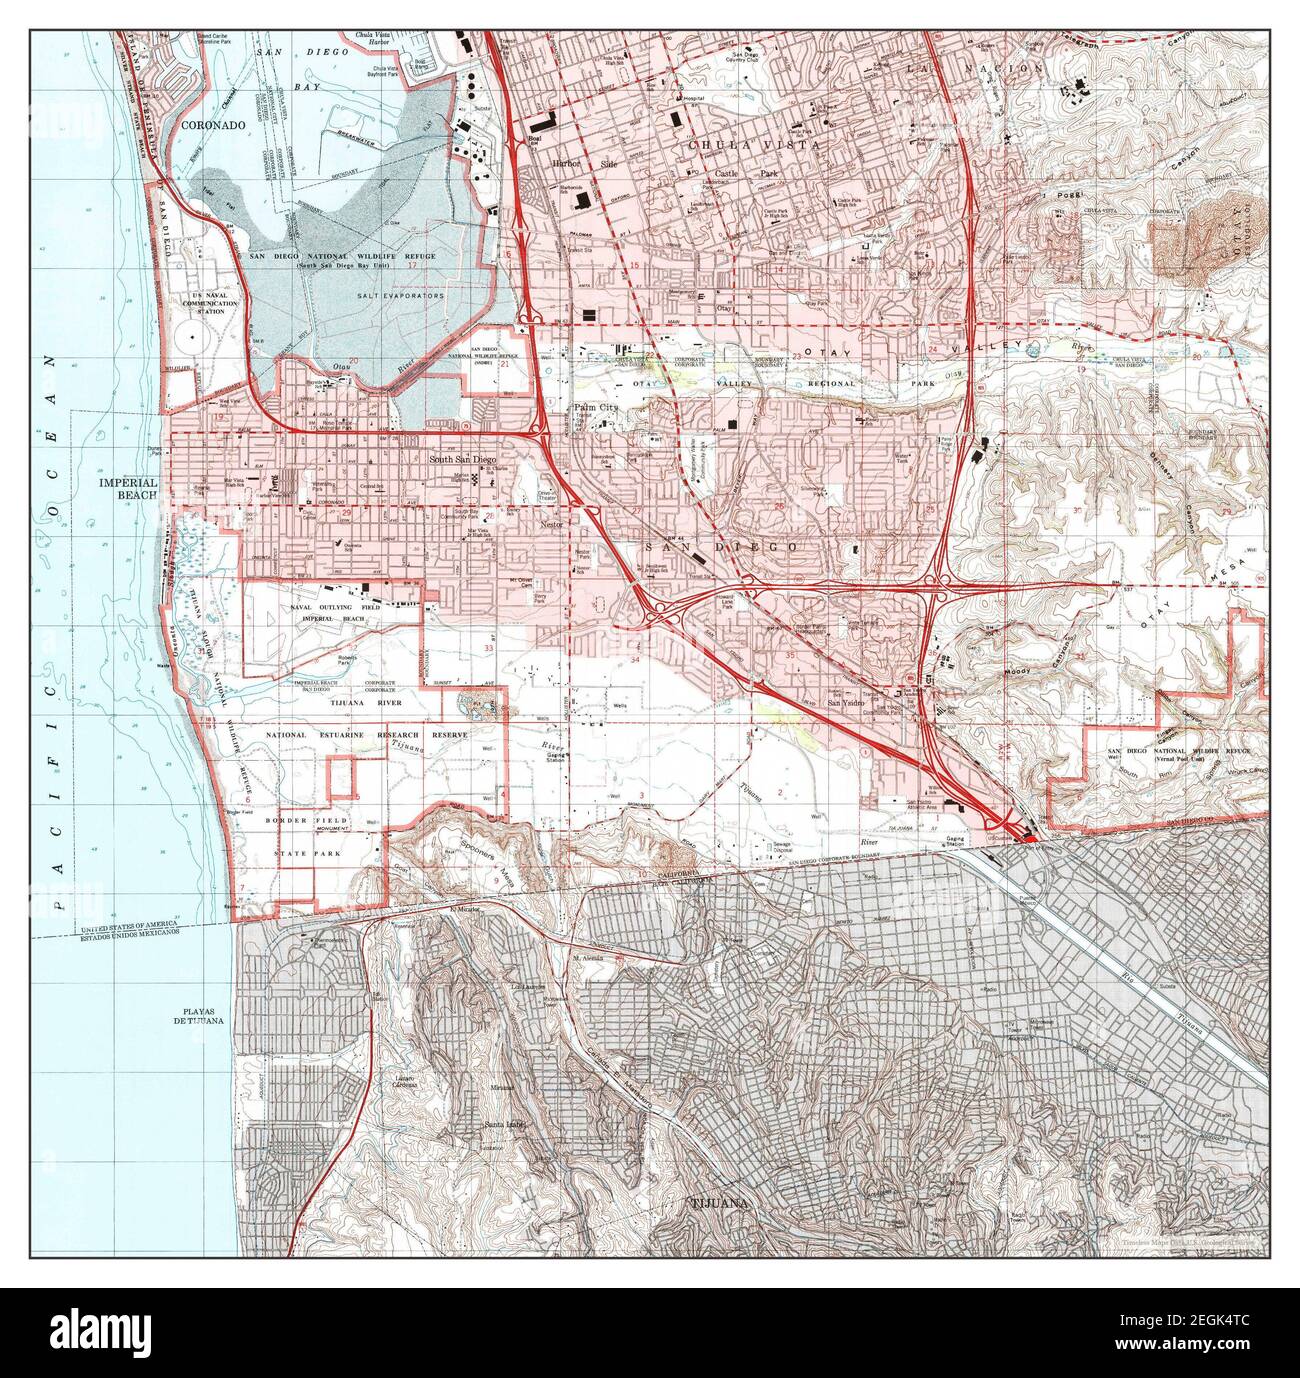 Imperial Beach California Map 1996 124000 United States Of America By Timeless Maps Data Us Geological Survey 2EGK4TC 